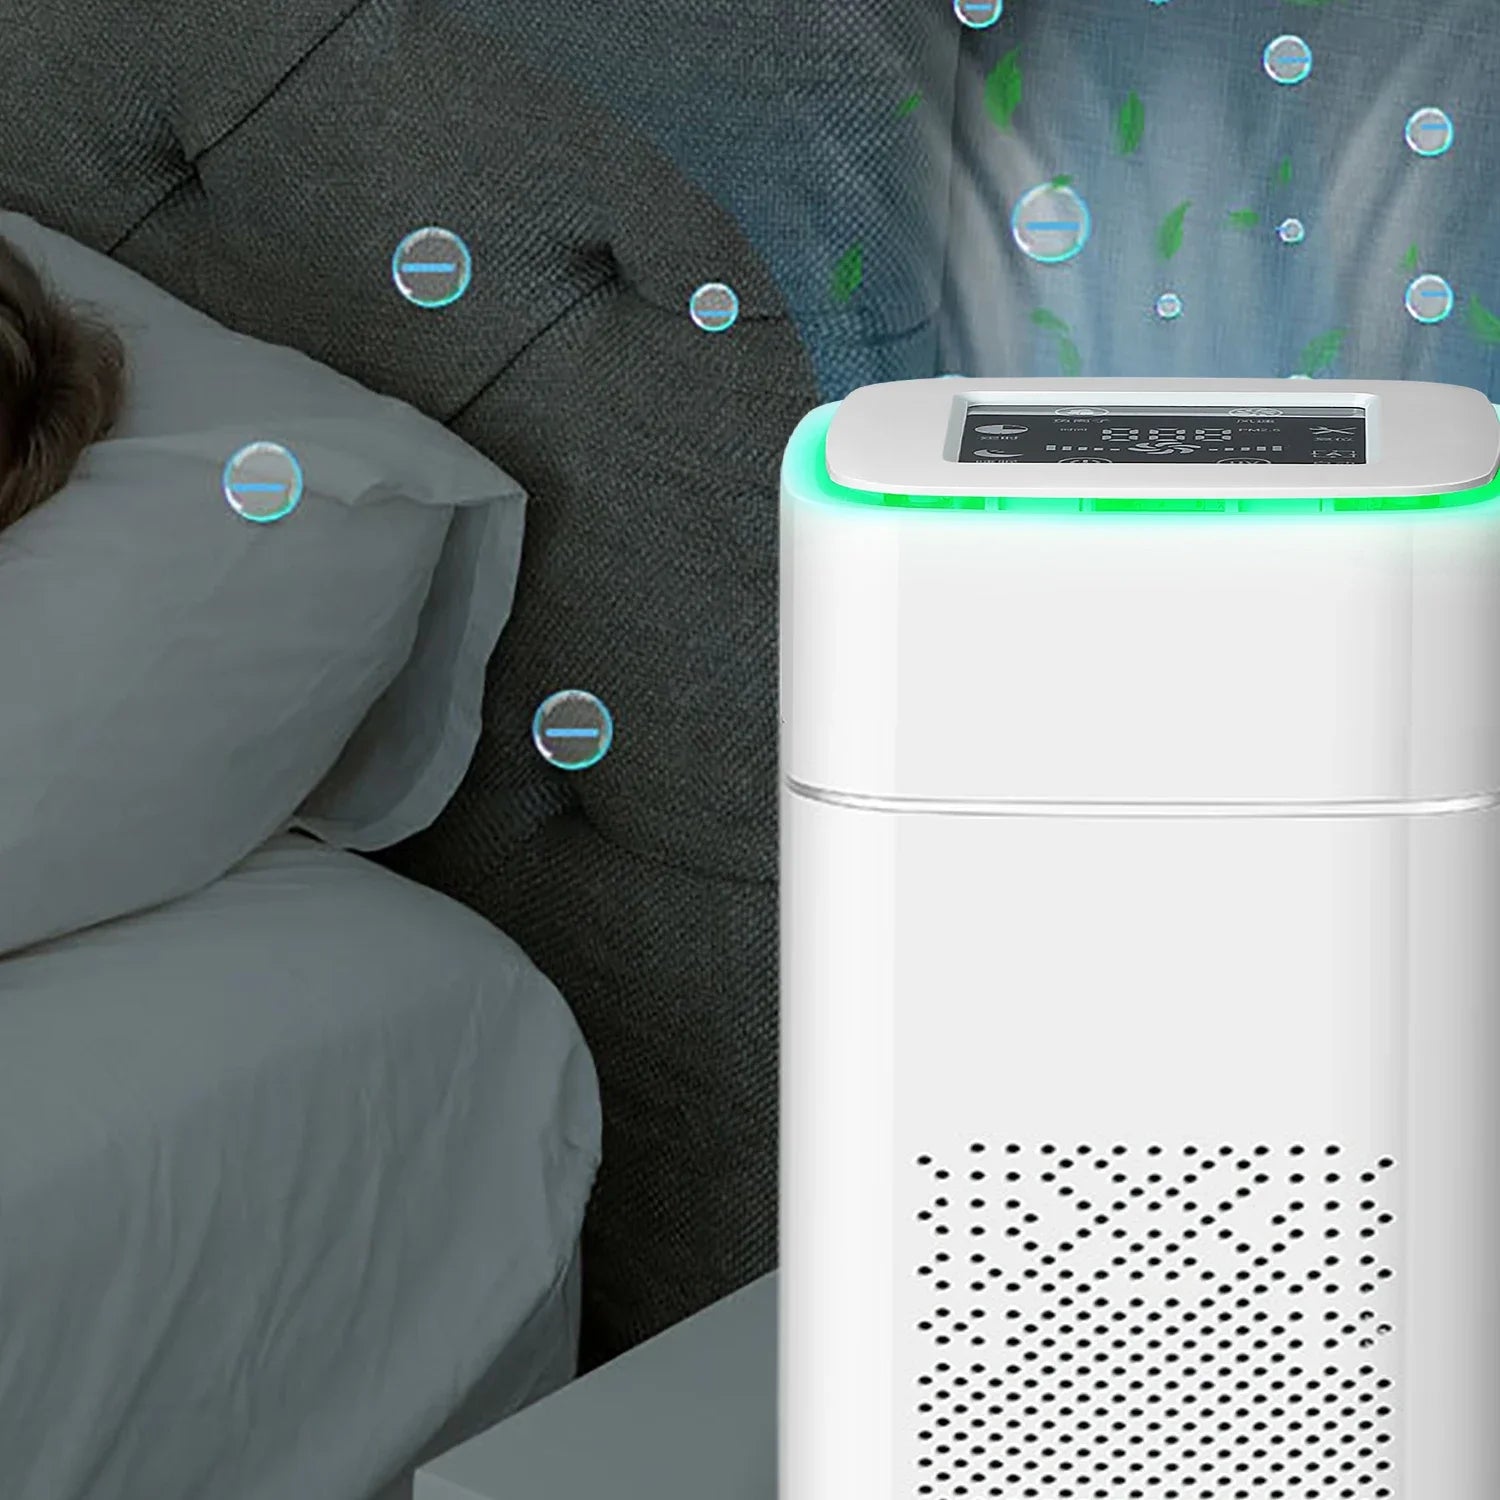 Air Purifier HEPA Negative Ions Generator Harmful PM2.5 Smoke Formaldehyde Gas Remover Eliminator for Bedroom with Night Light